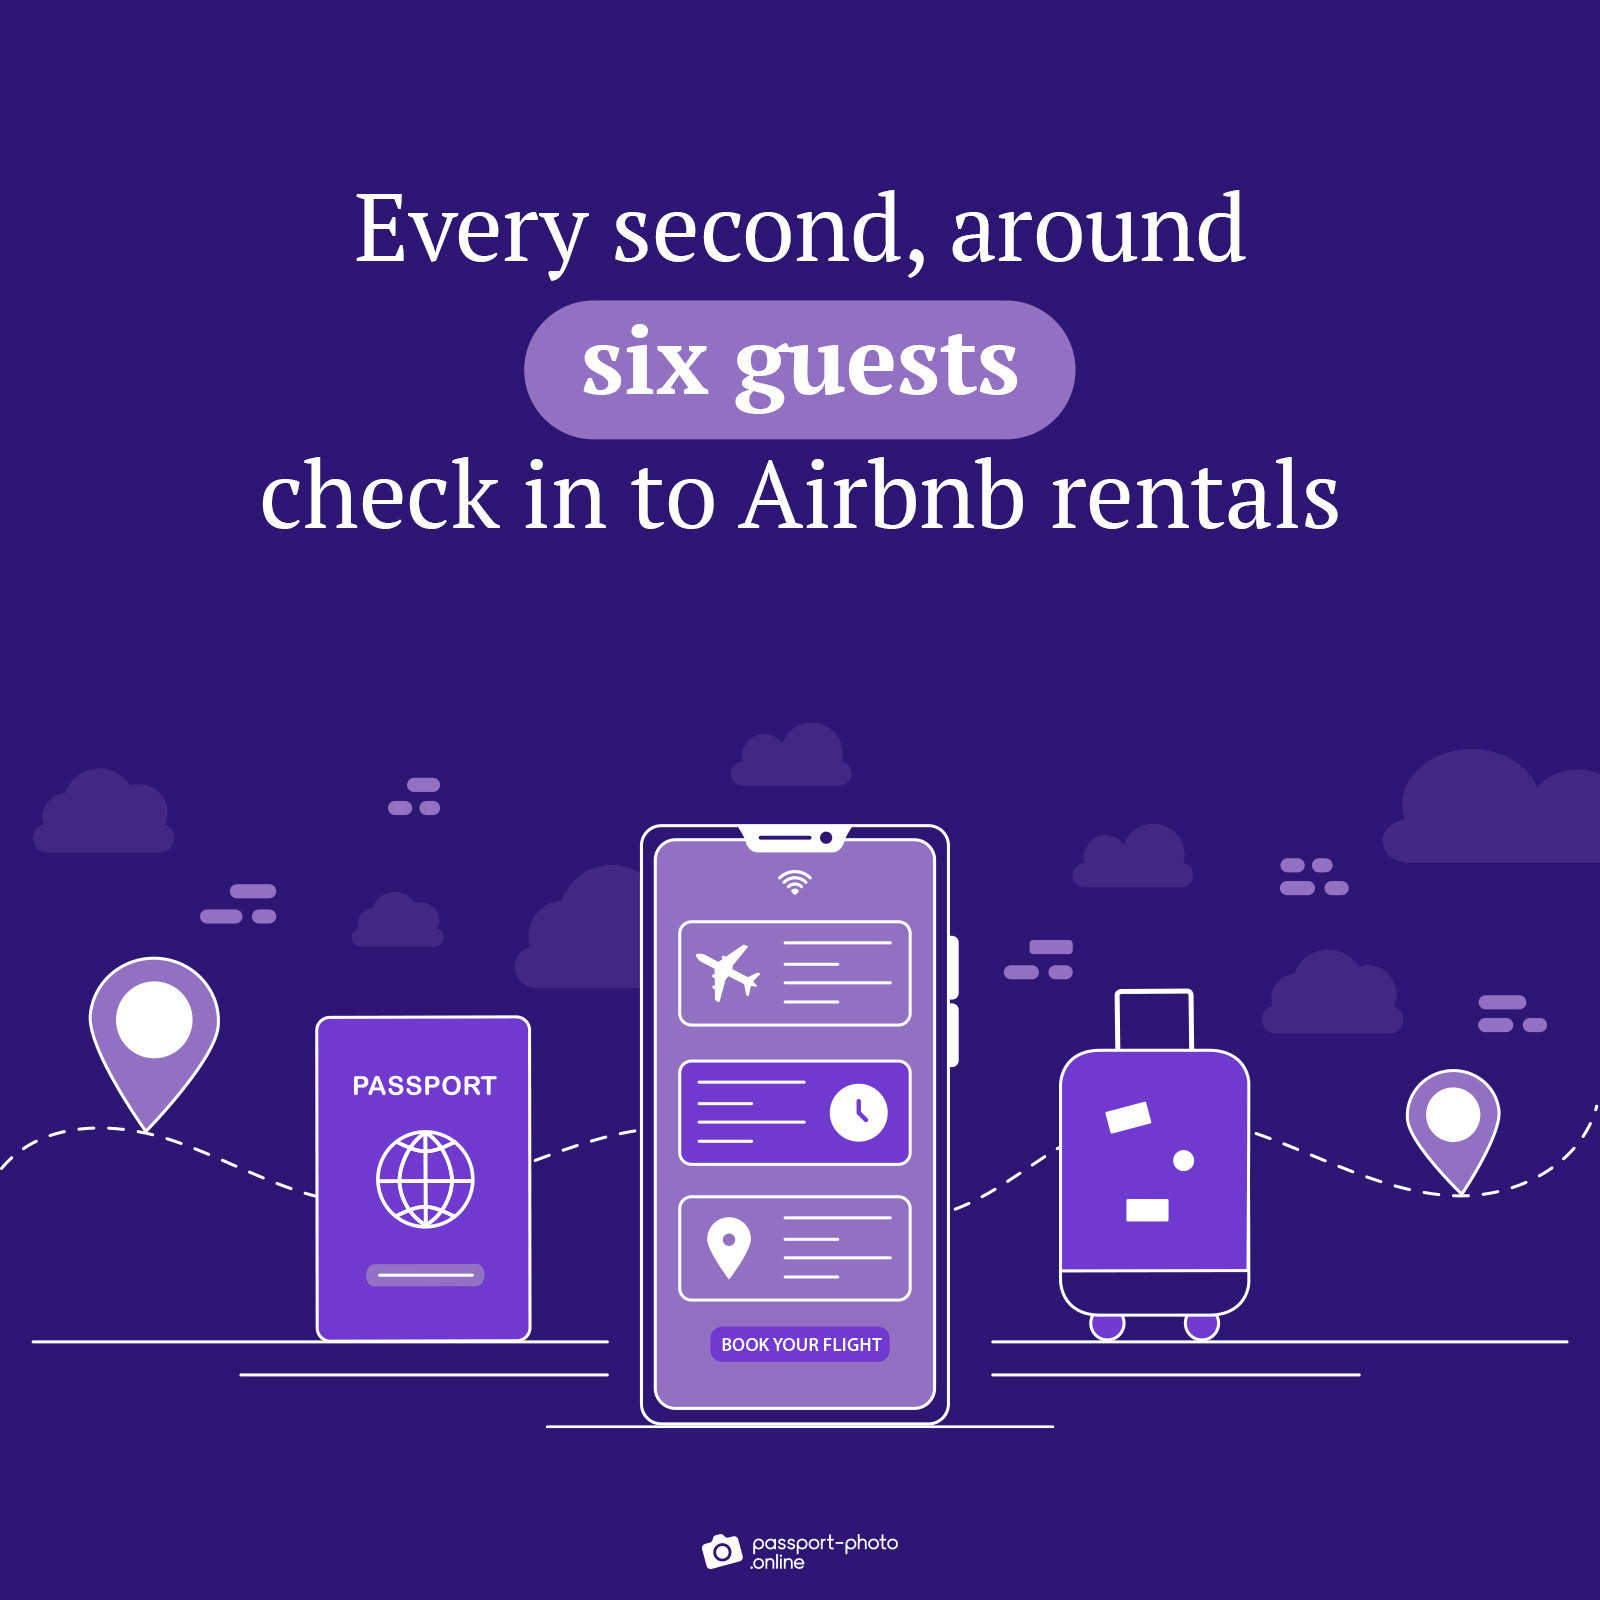 Every second, around six guests check in to Airbnb rentals